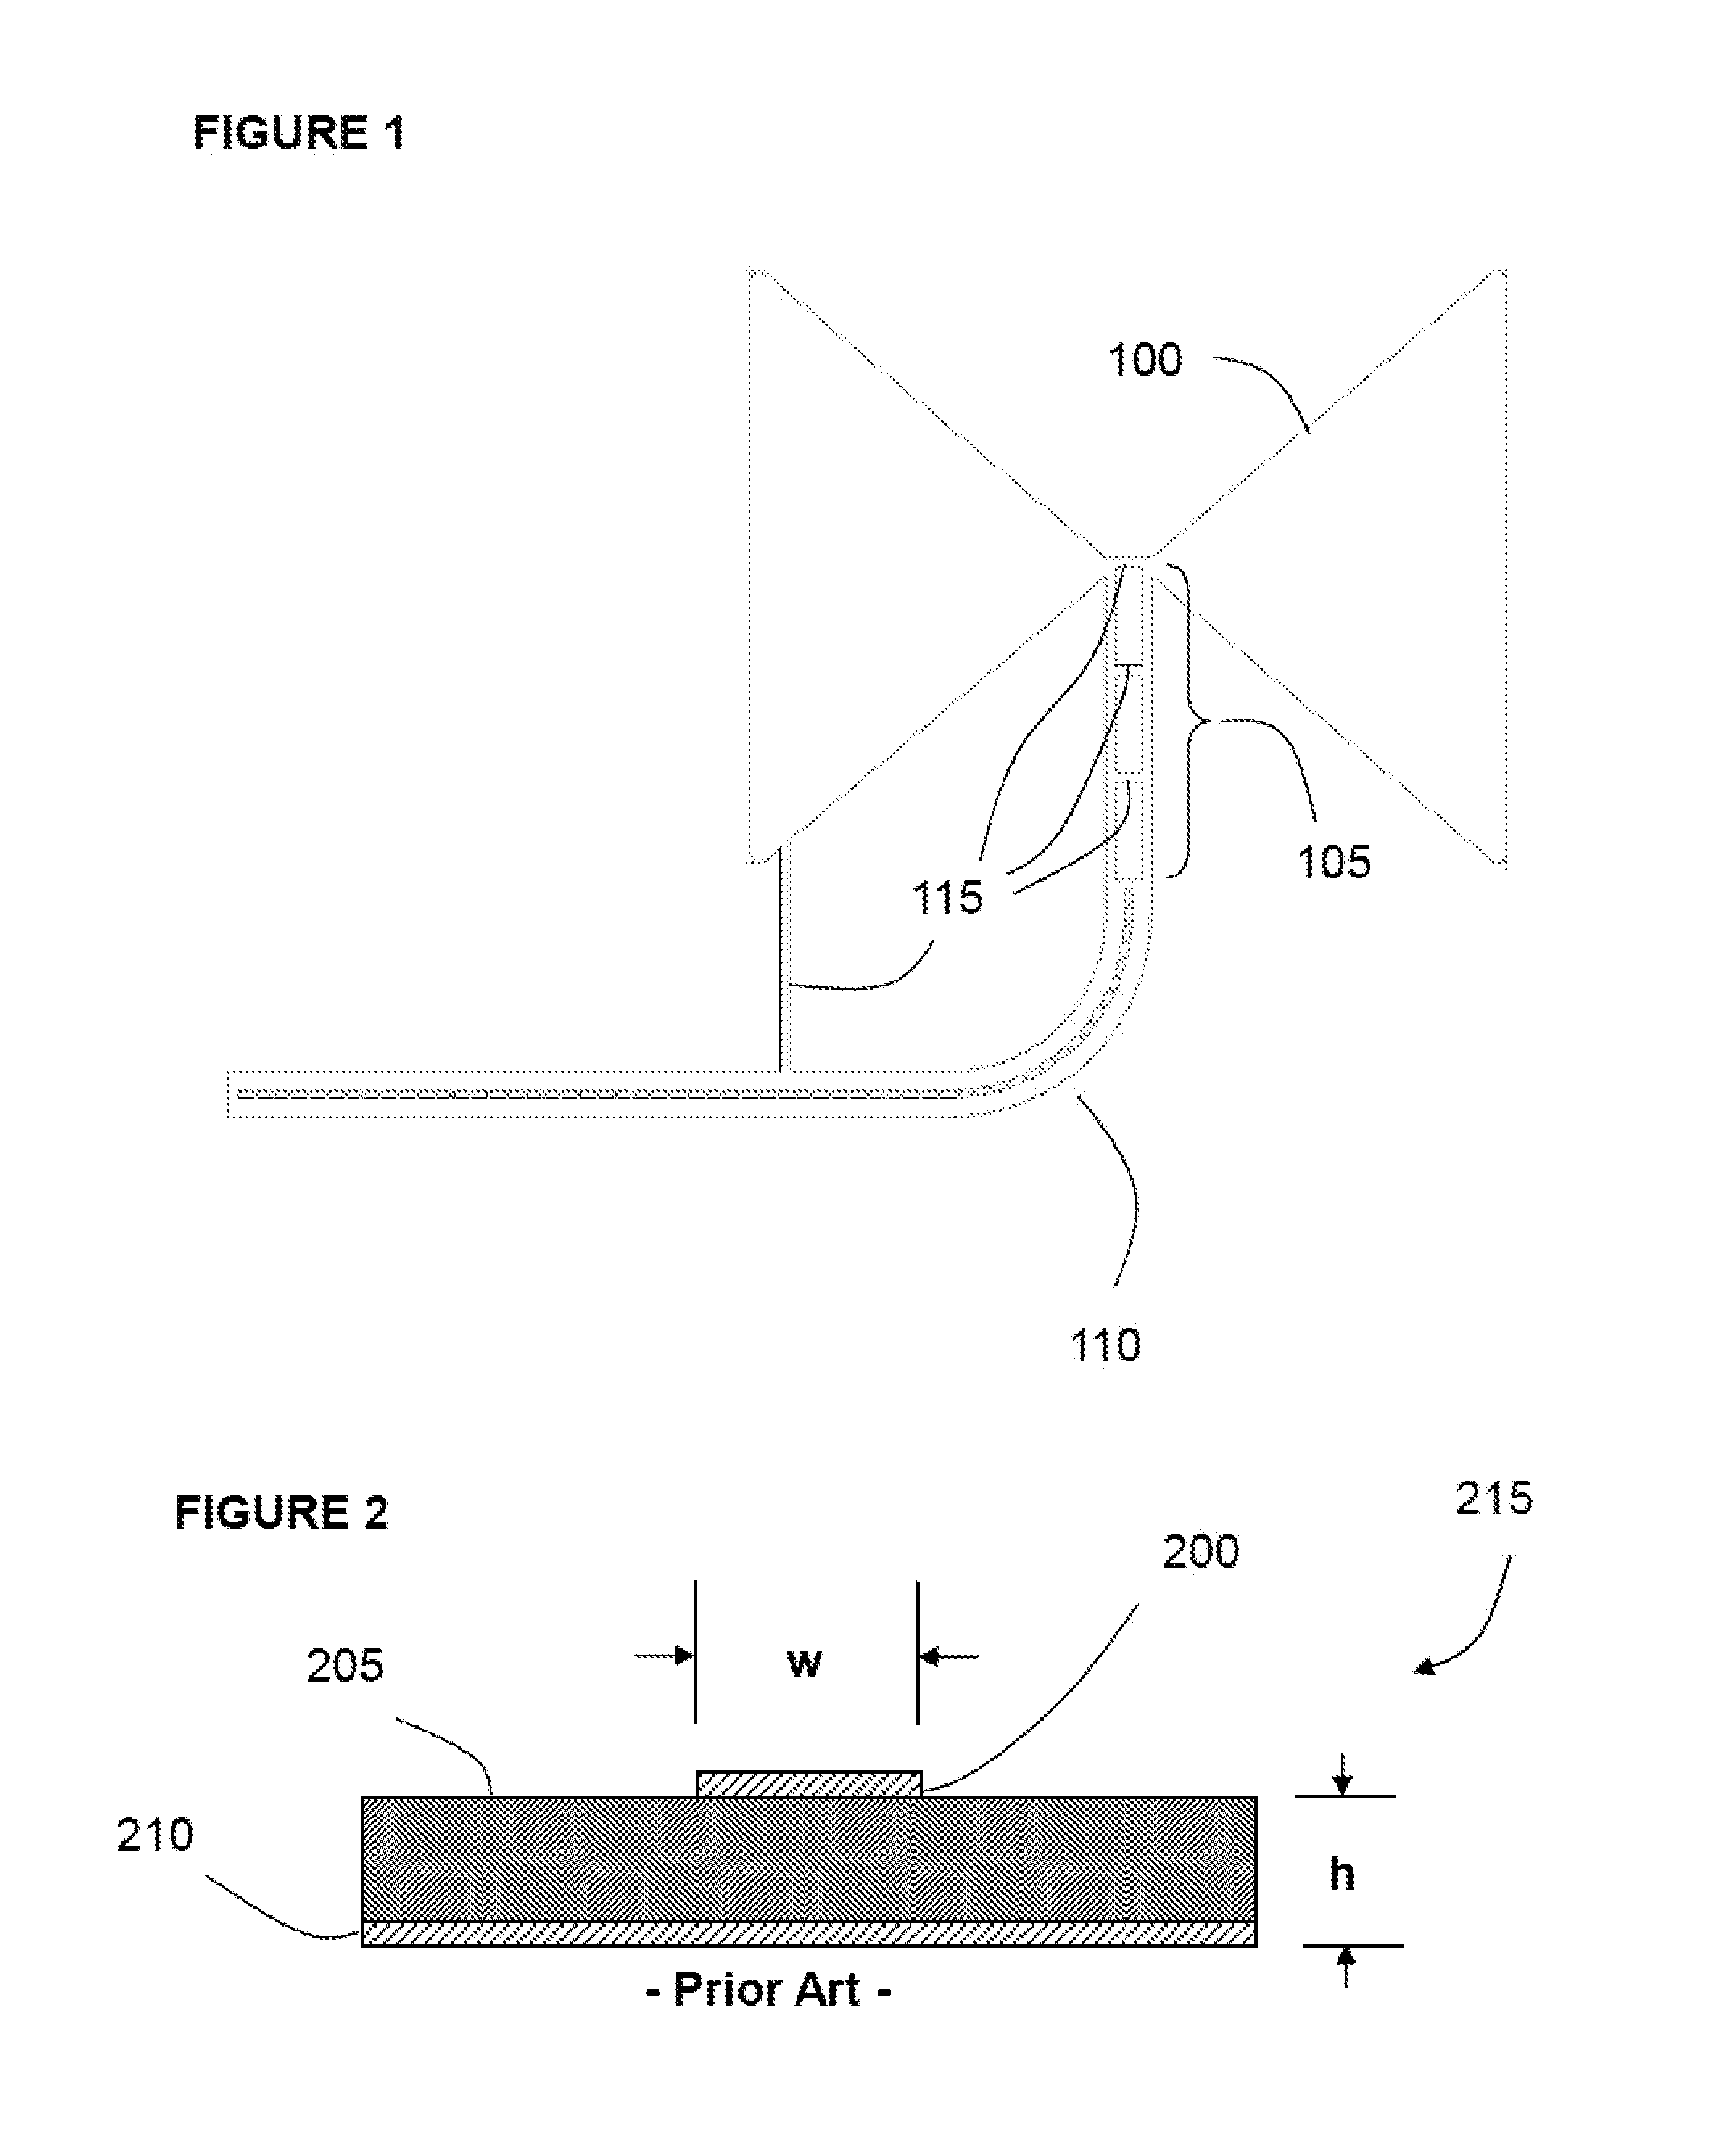 Wearable antenna having a microstrip feed line disposed on a flexible fabric and including periodic apertures in a ground plane